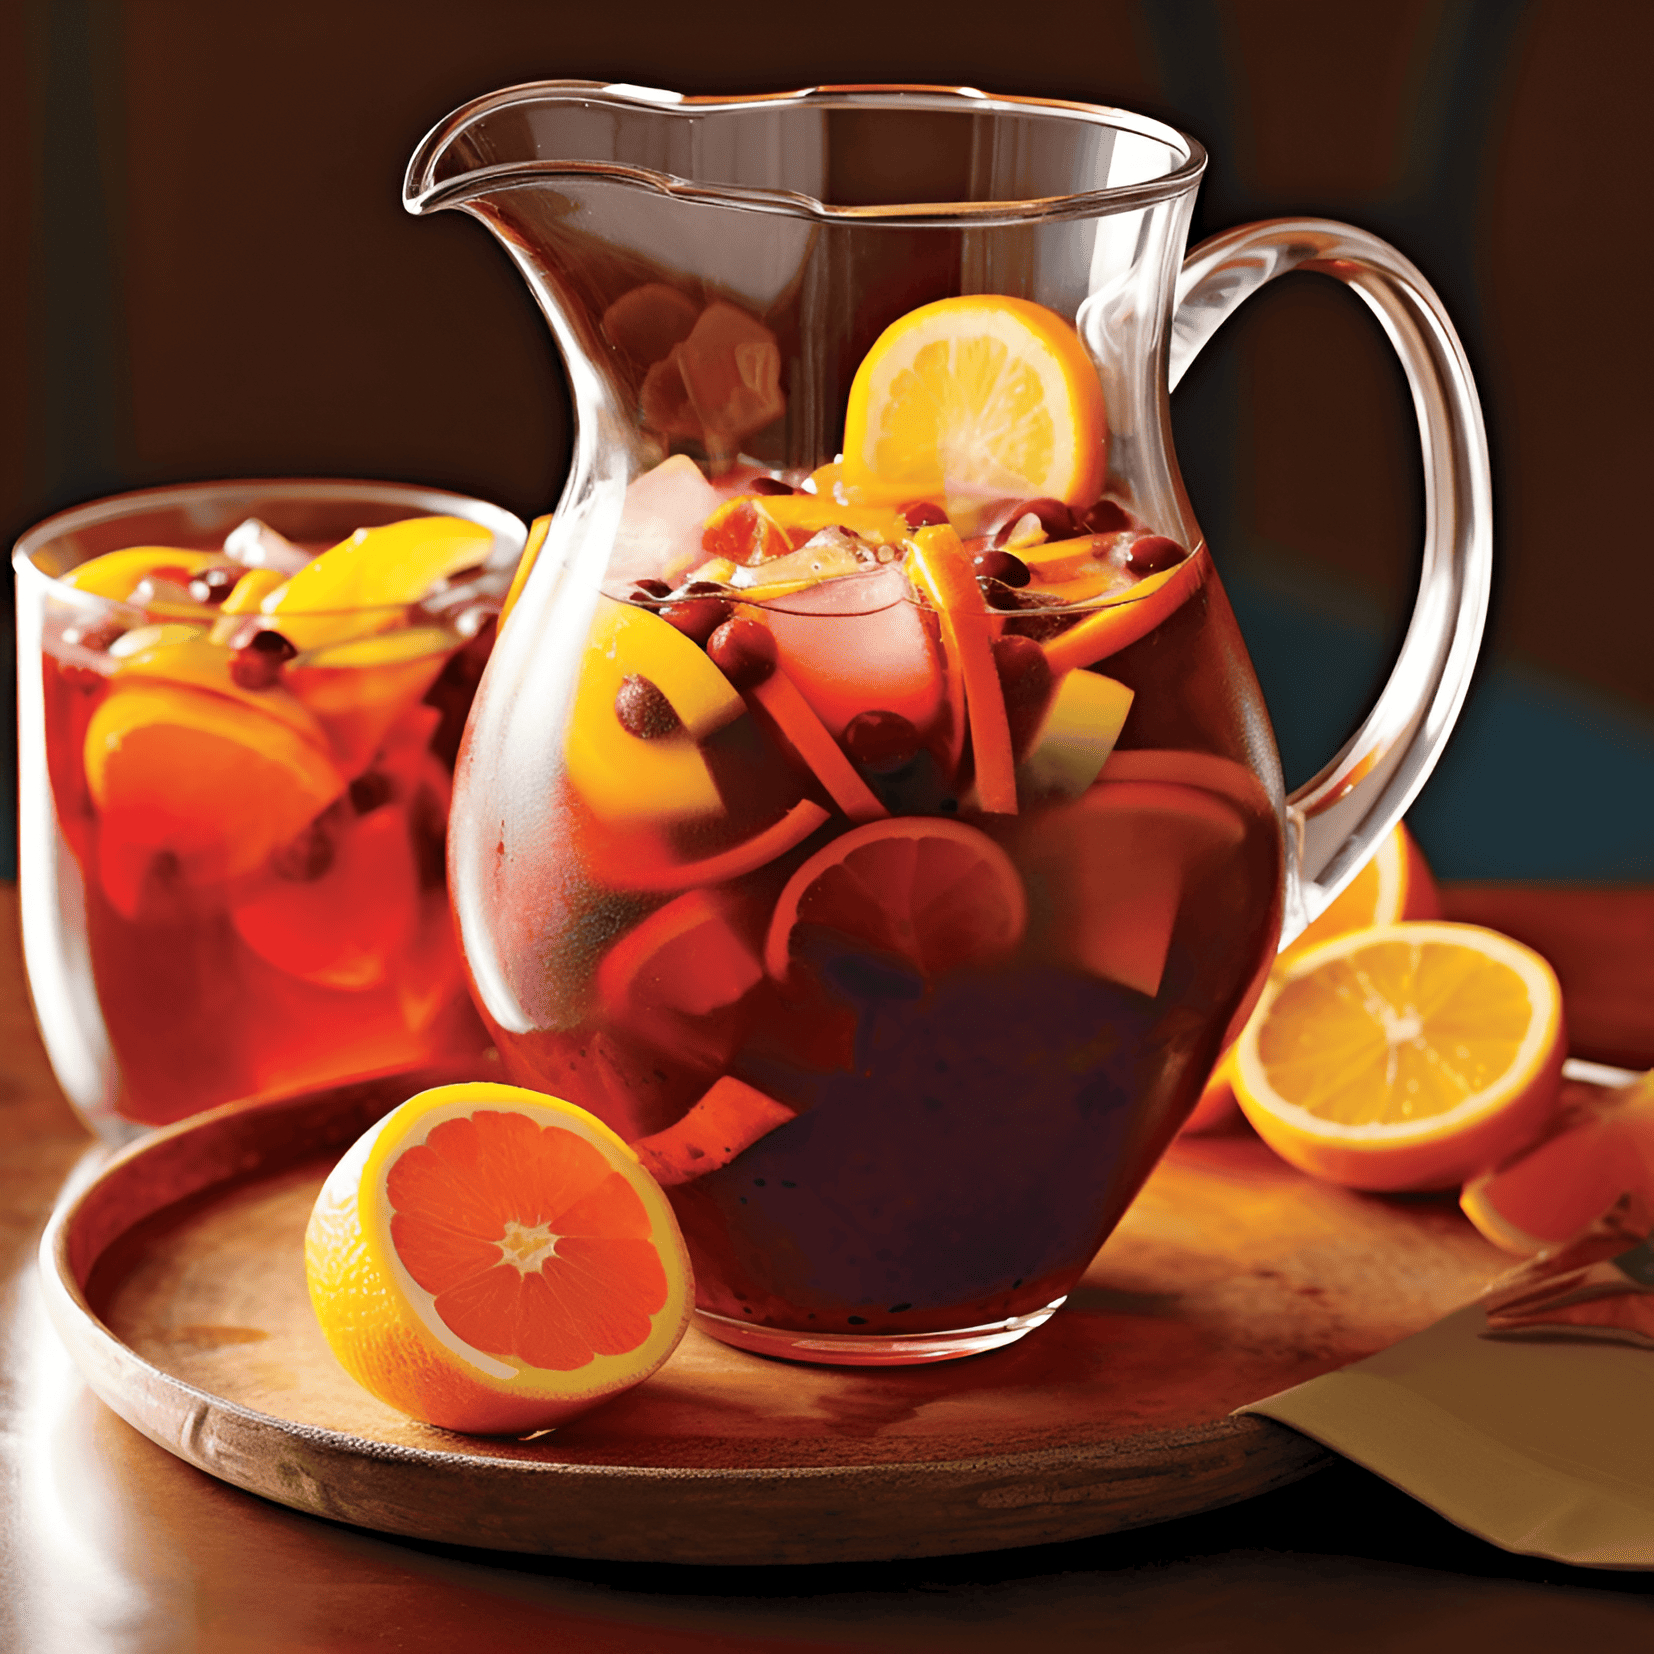 Sangria Cocktail Recipe - Sangria is a fruity, refreshing, and slightly sweet cocktail with a hint of tartness from the citrus fruits. It is well-balanced, with the wine and fruit flavors complementing each other perfectly.